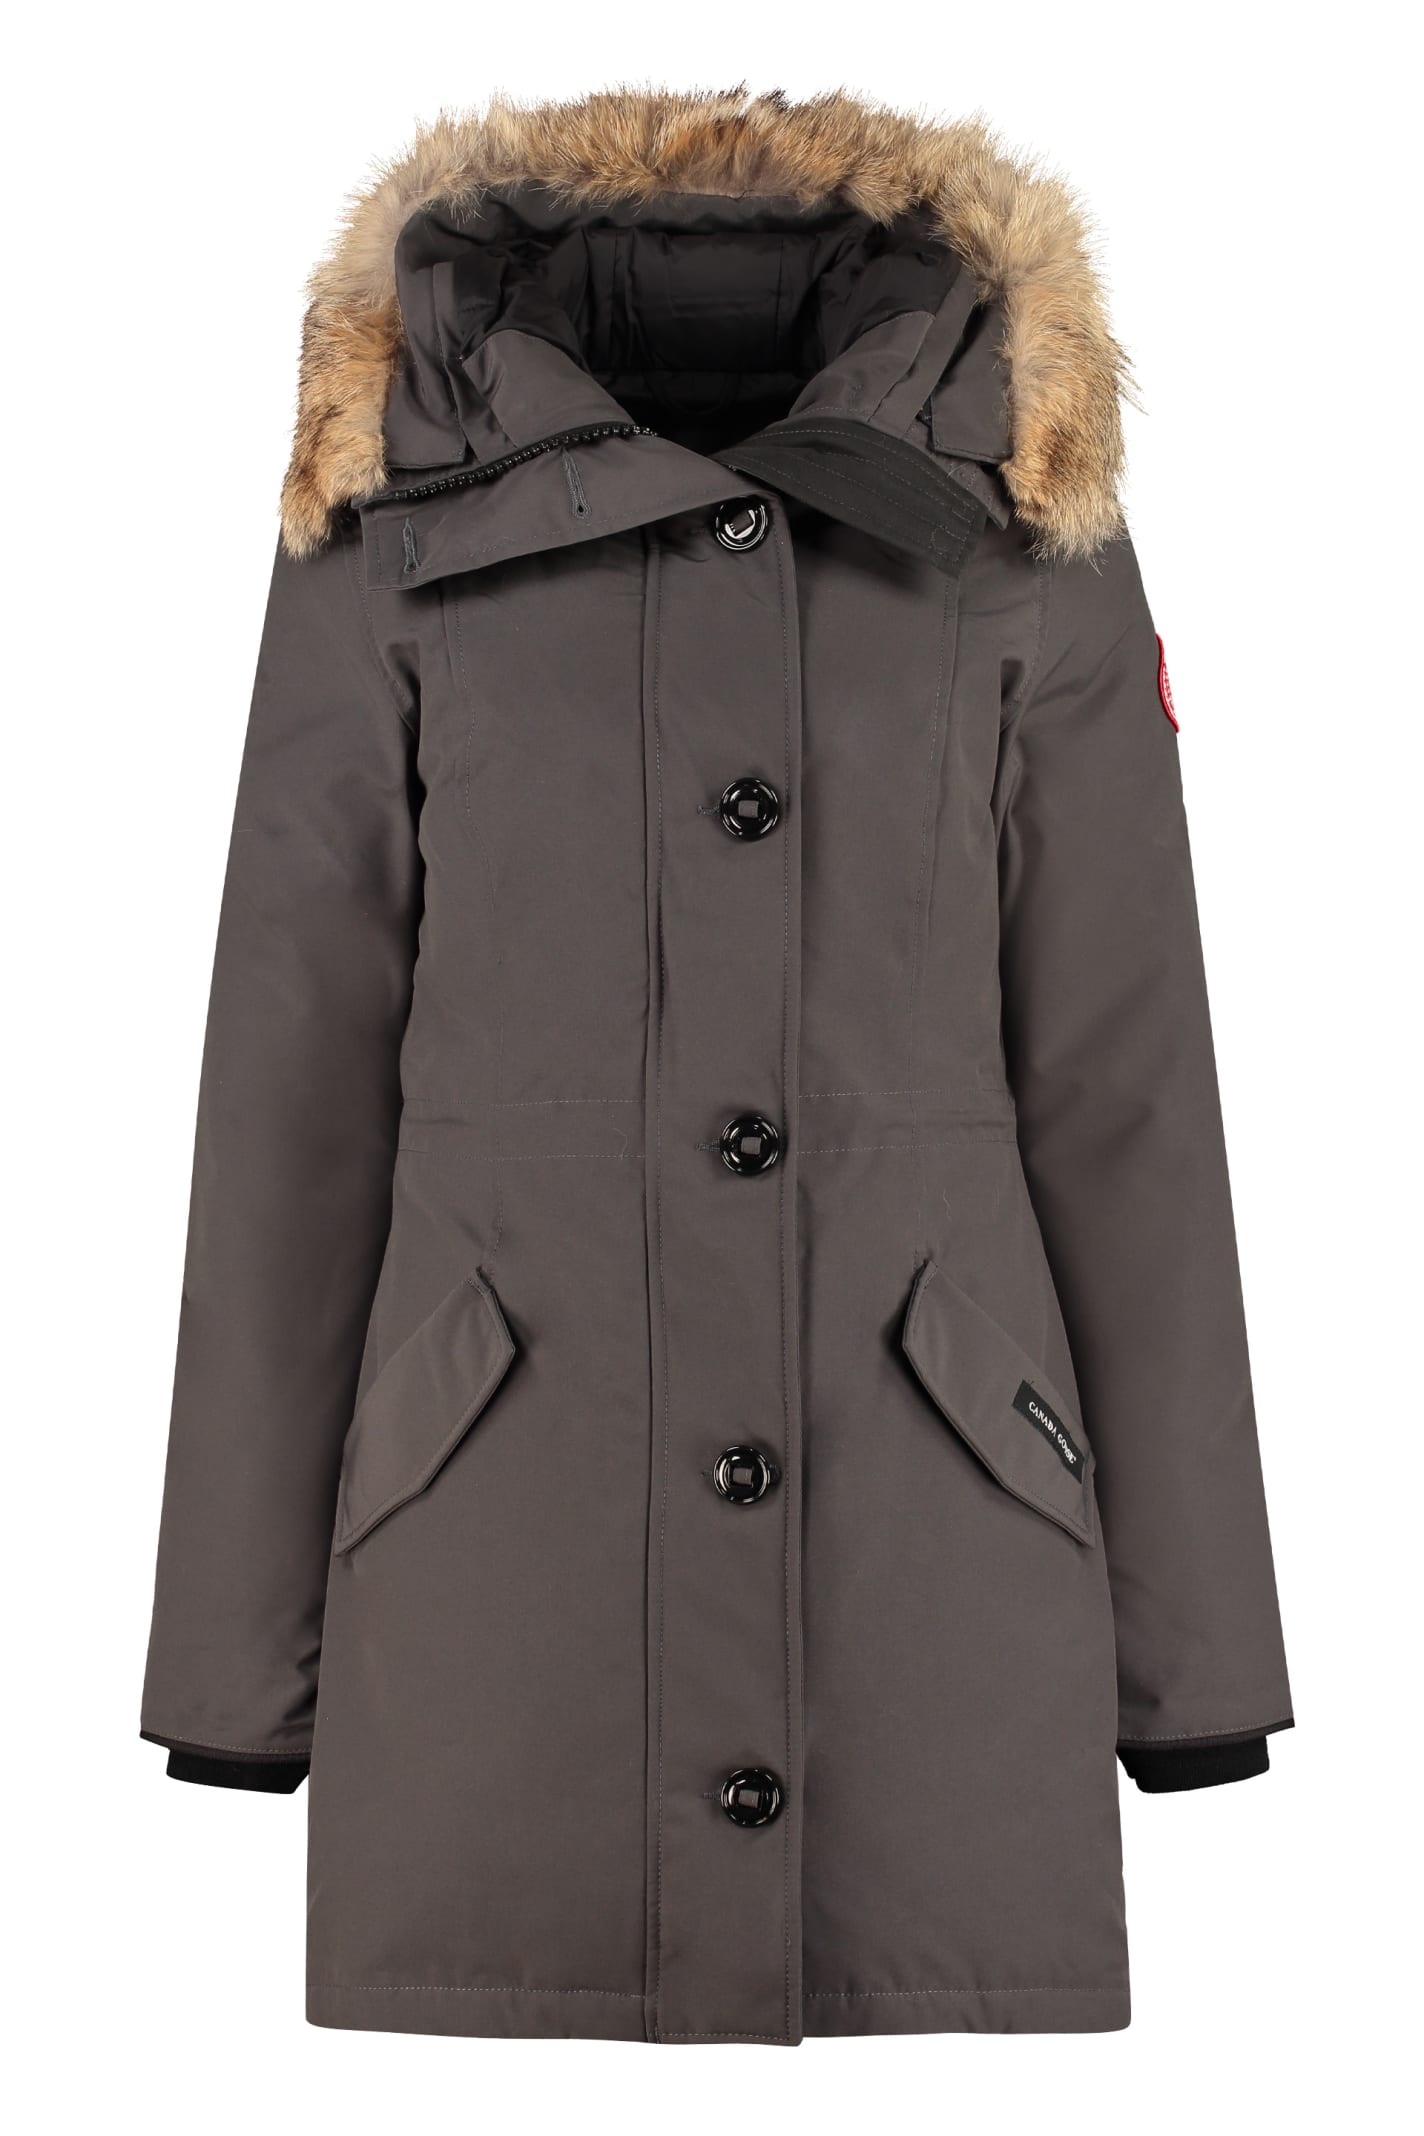 Canada Goose Rossclair Hooded Parka